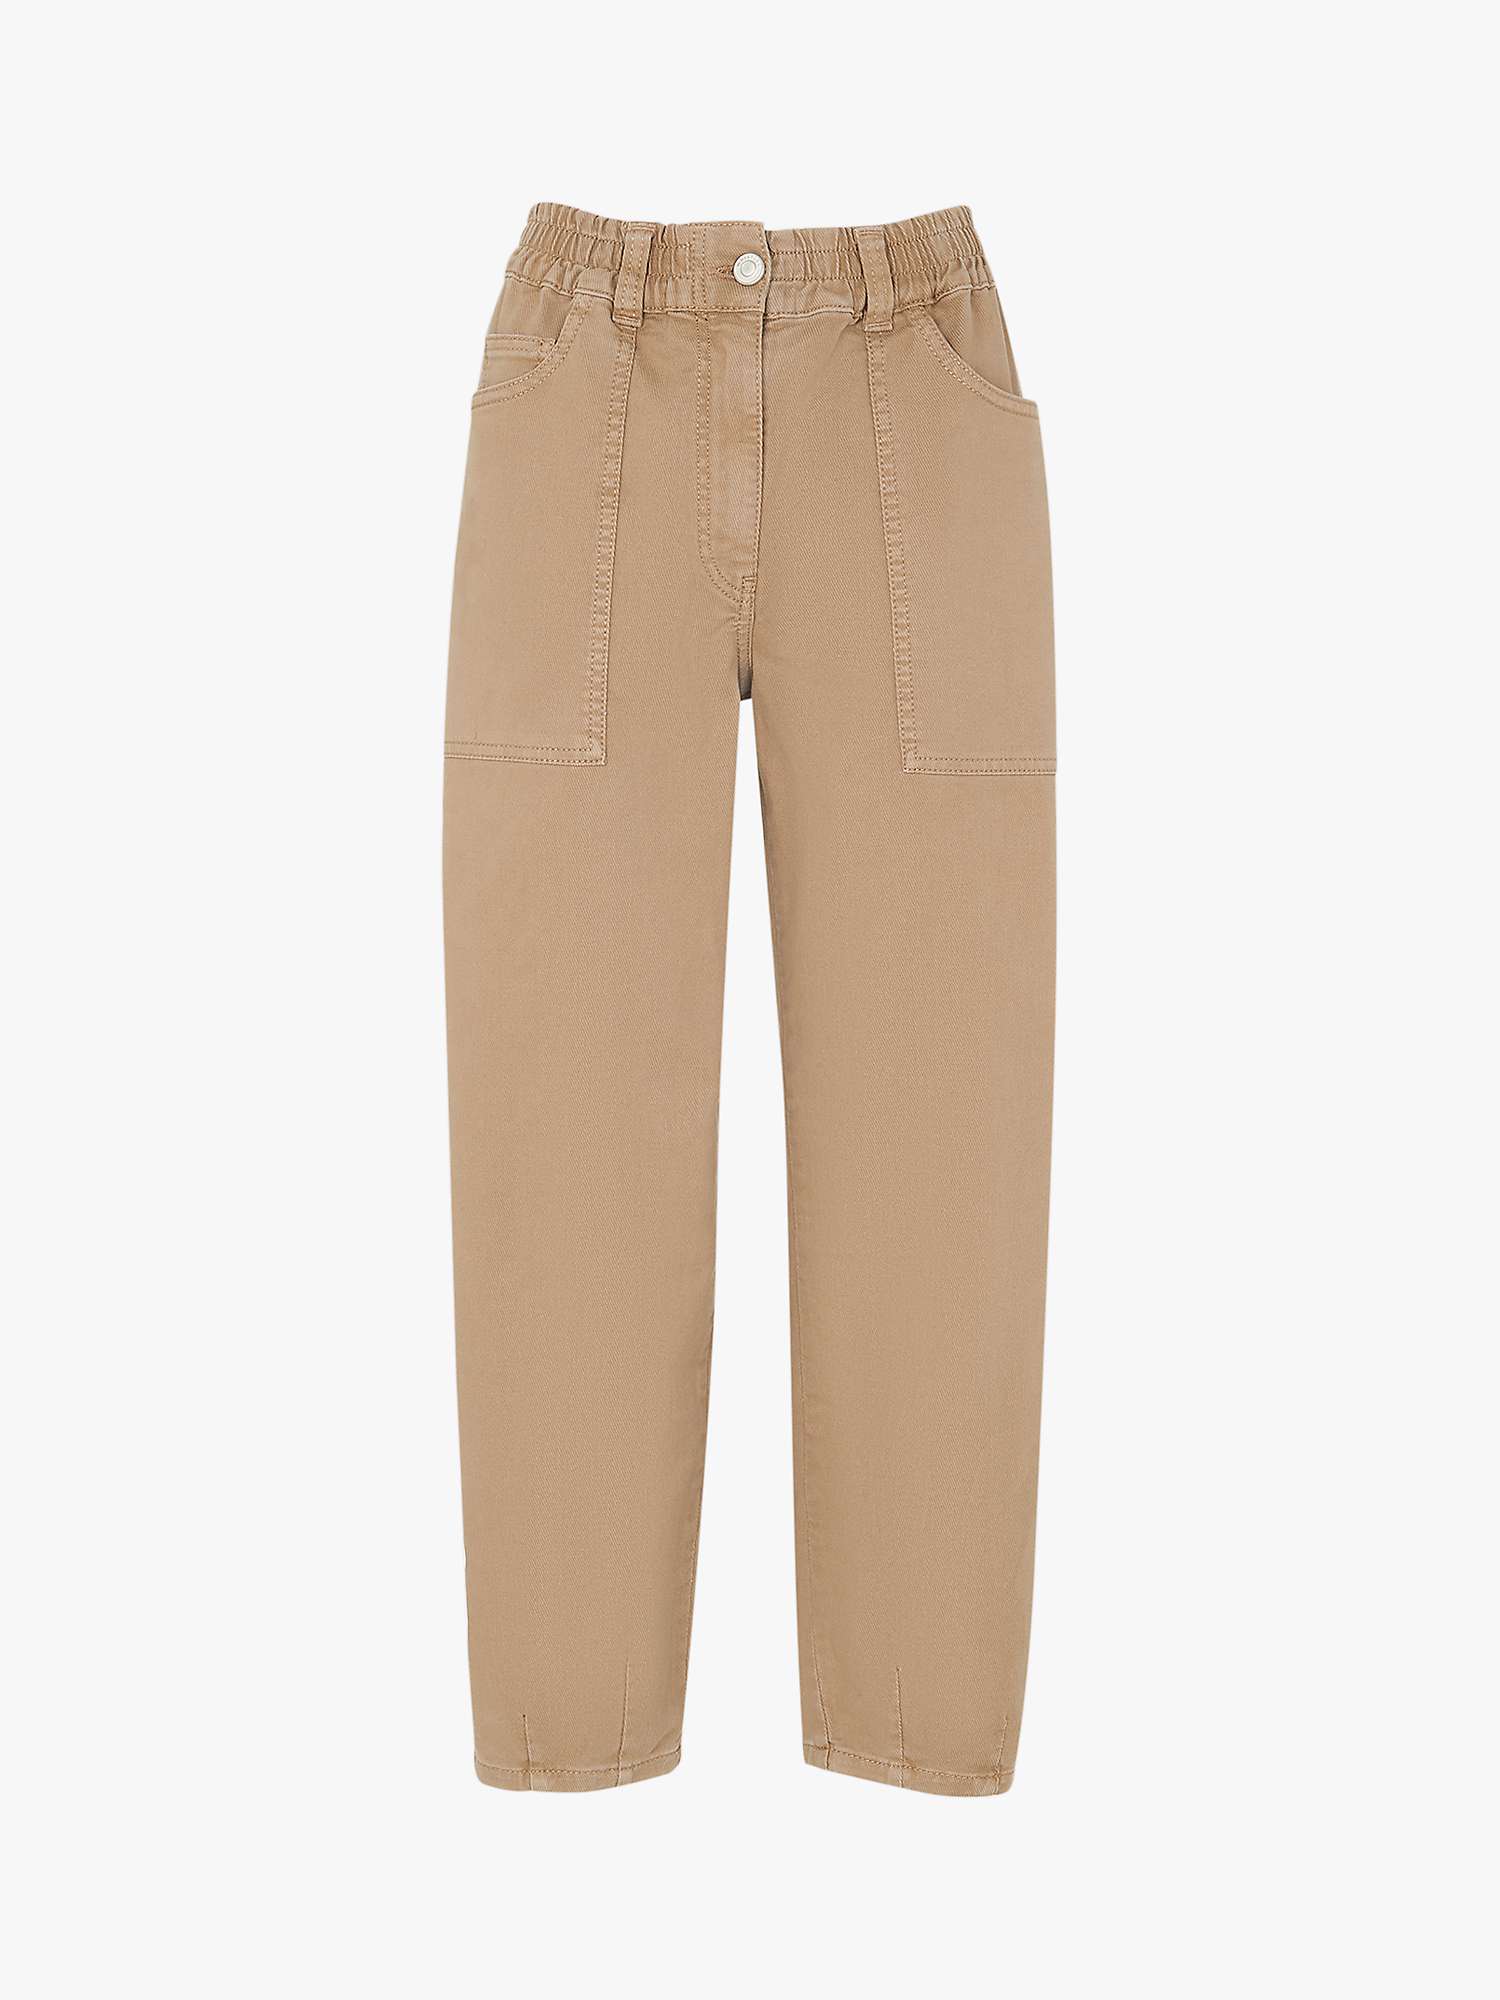 Whistles Tessa Casual Trousers, Navy, Stone at John Lewis & Partners